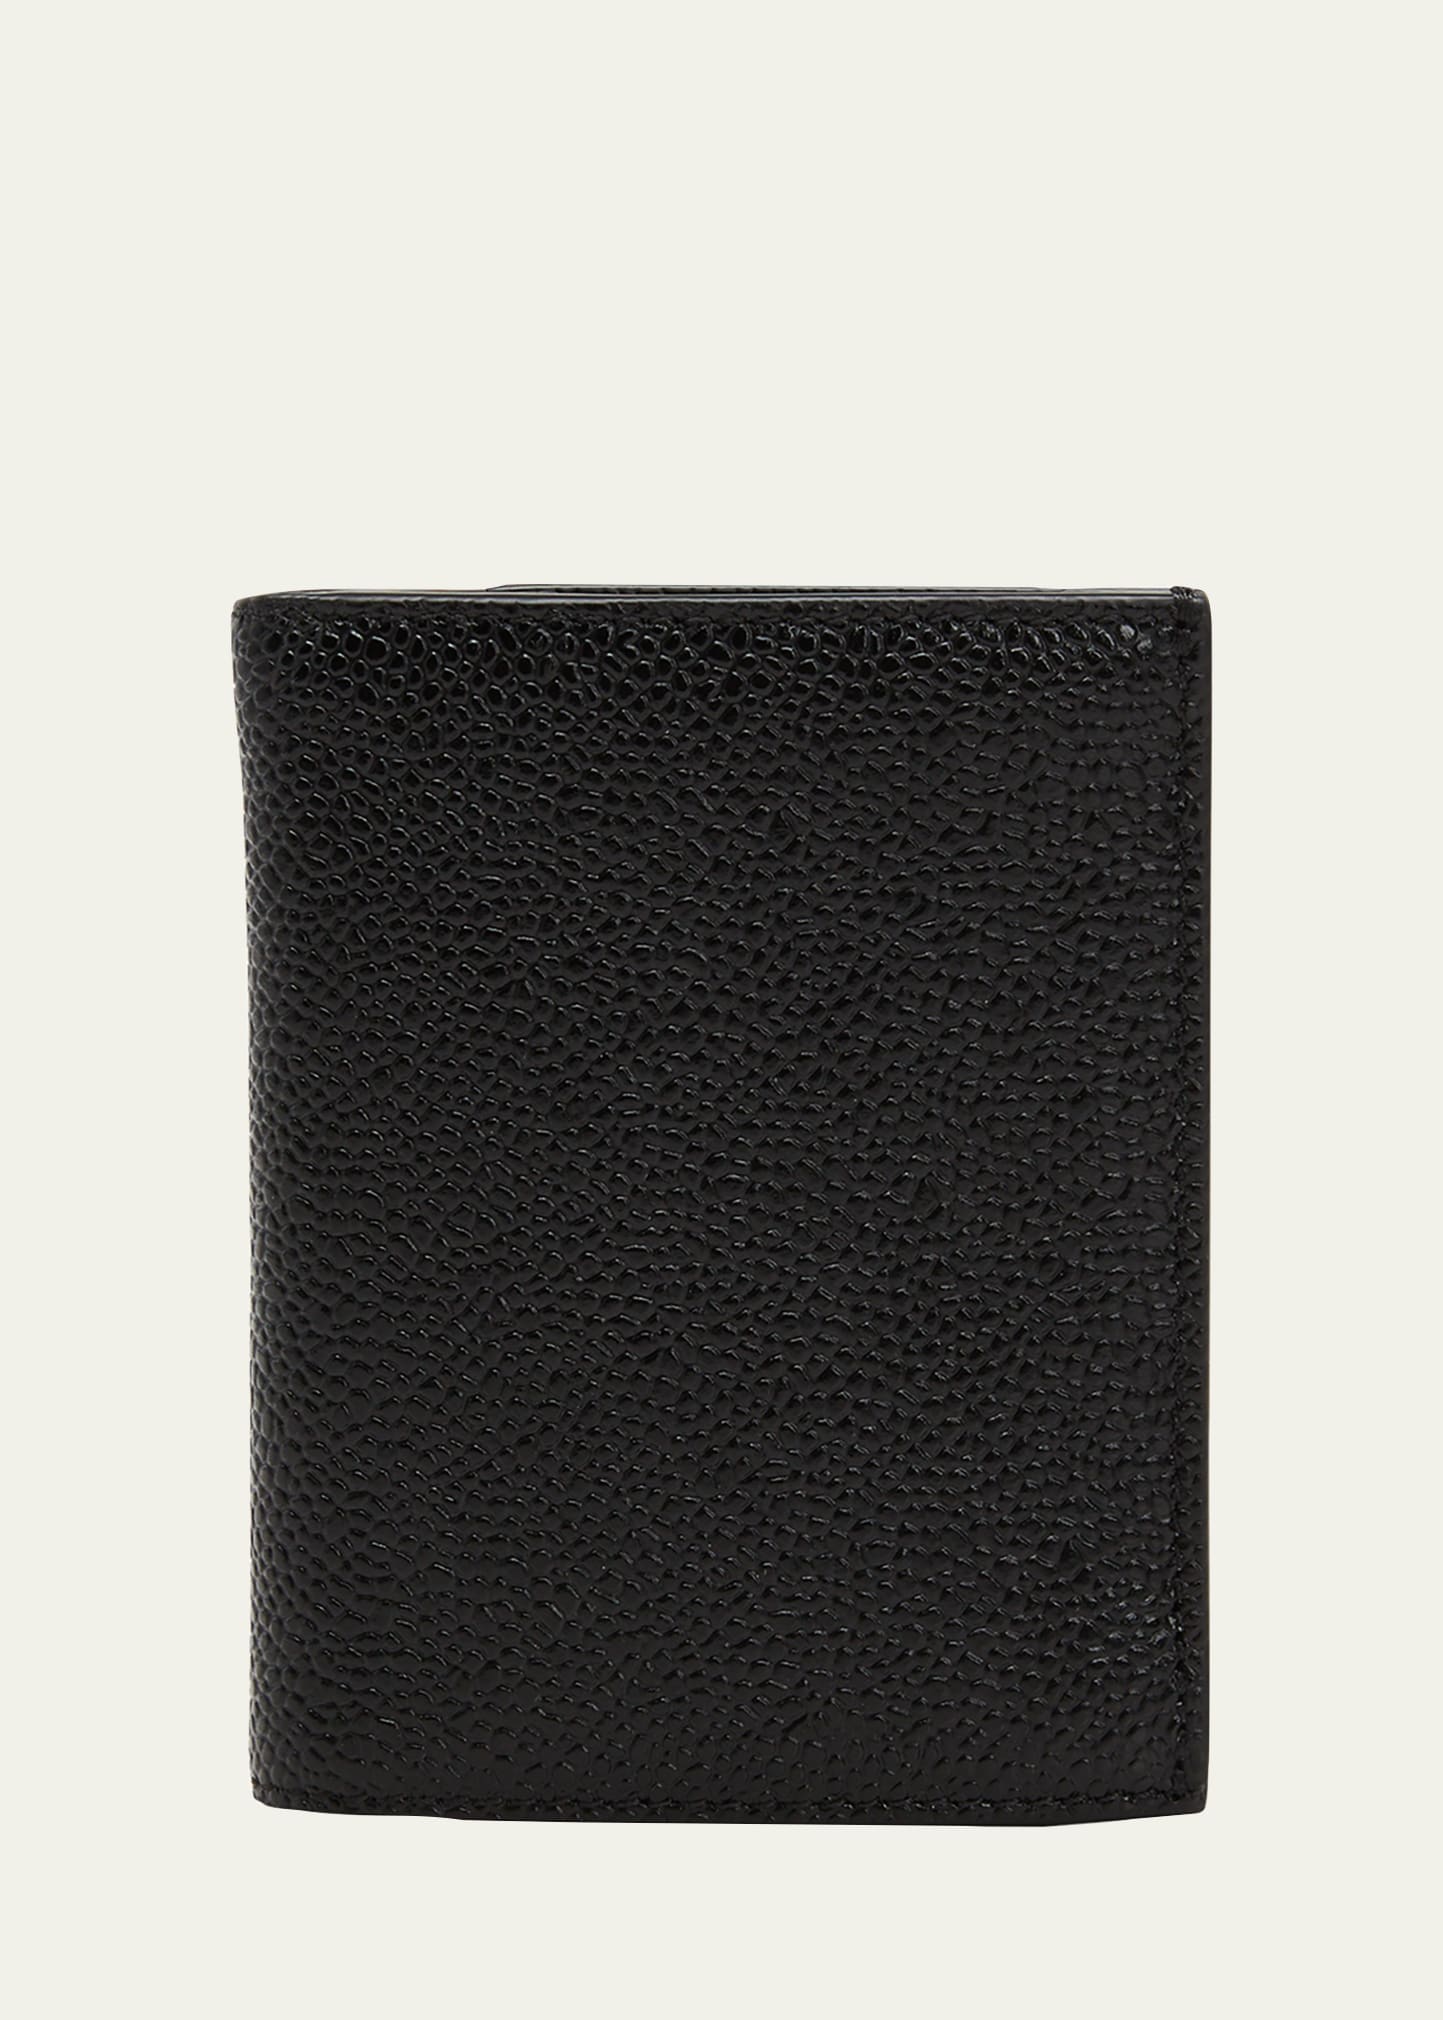 Thom Browne Men's Pebble Leather Billfold Wallet With Coin Compartment In Black